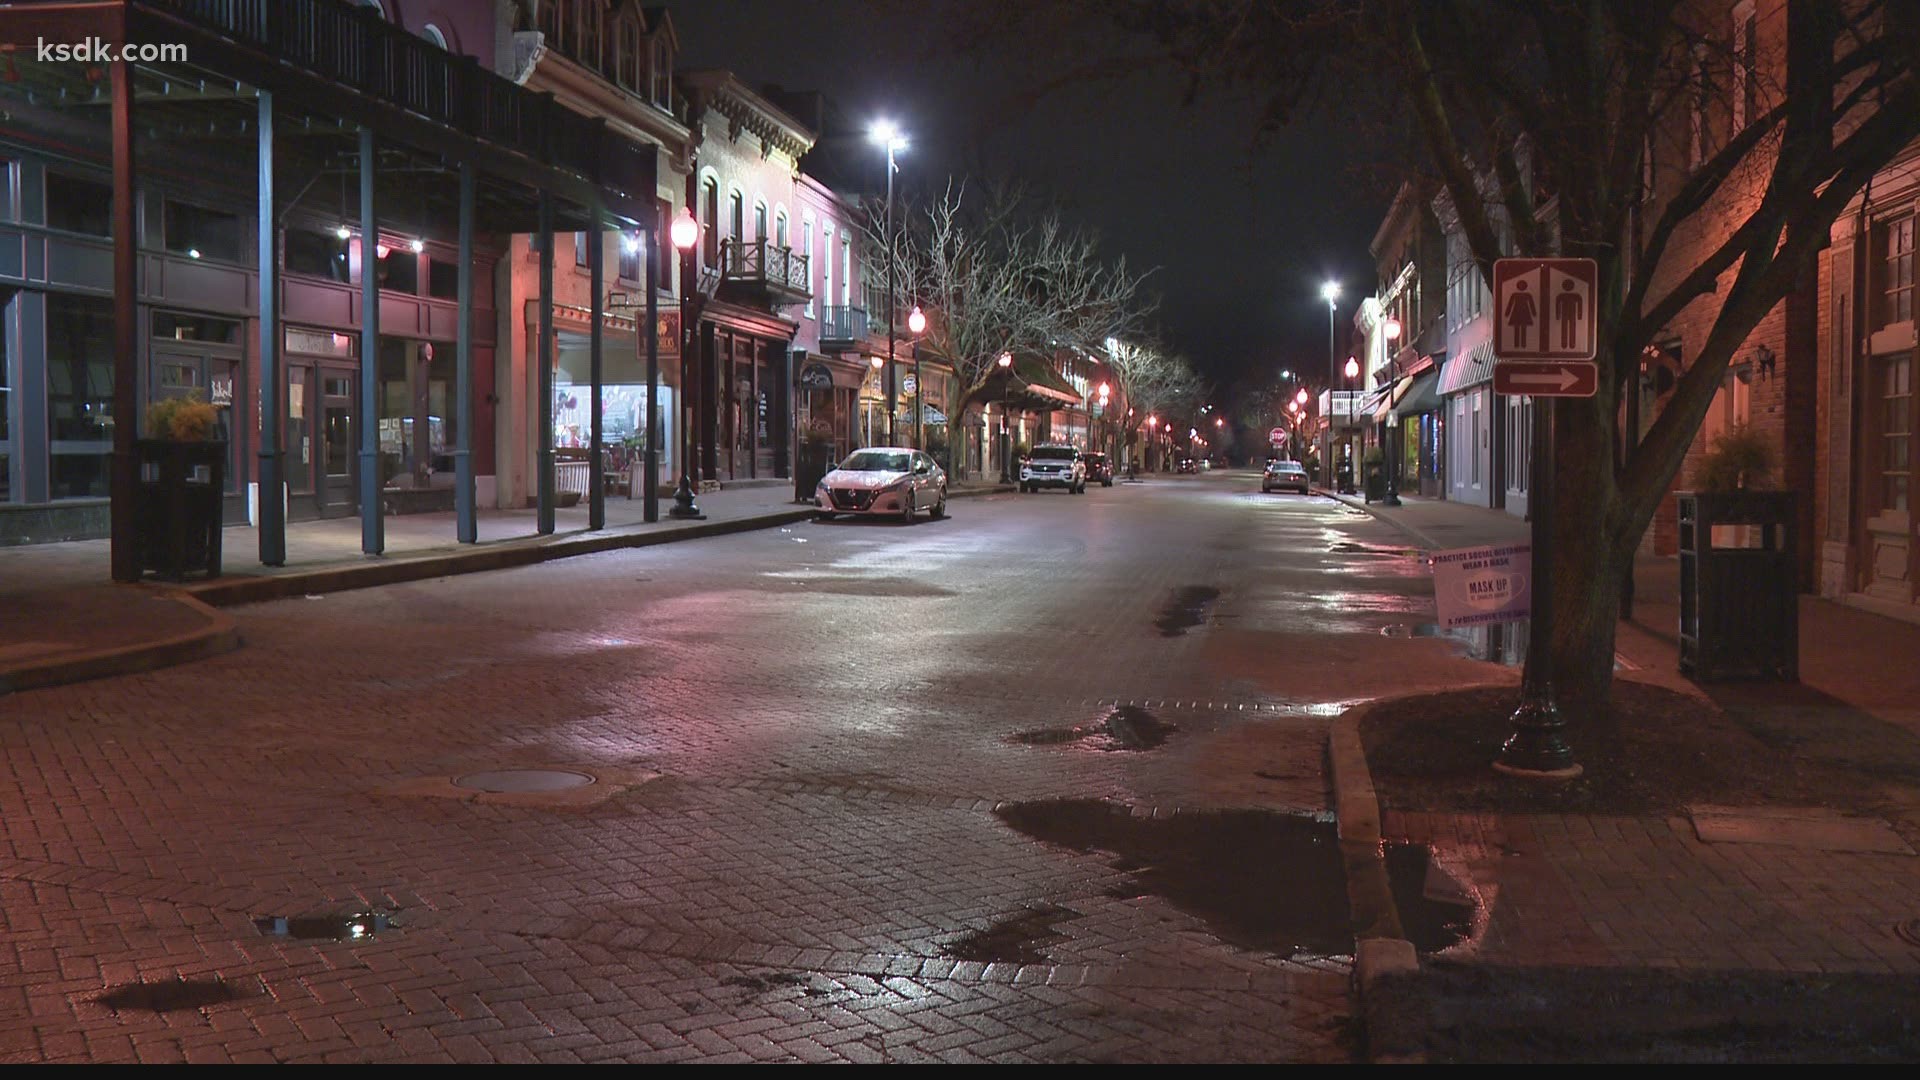 The city of St. Charles announced last week it would enforce an existing zoning law in an effort to cut down on violence and rowdy behavior on North Main Street